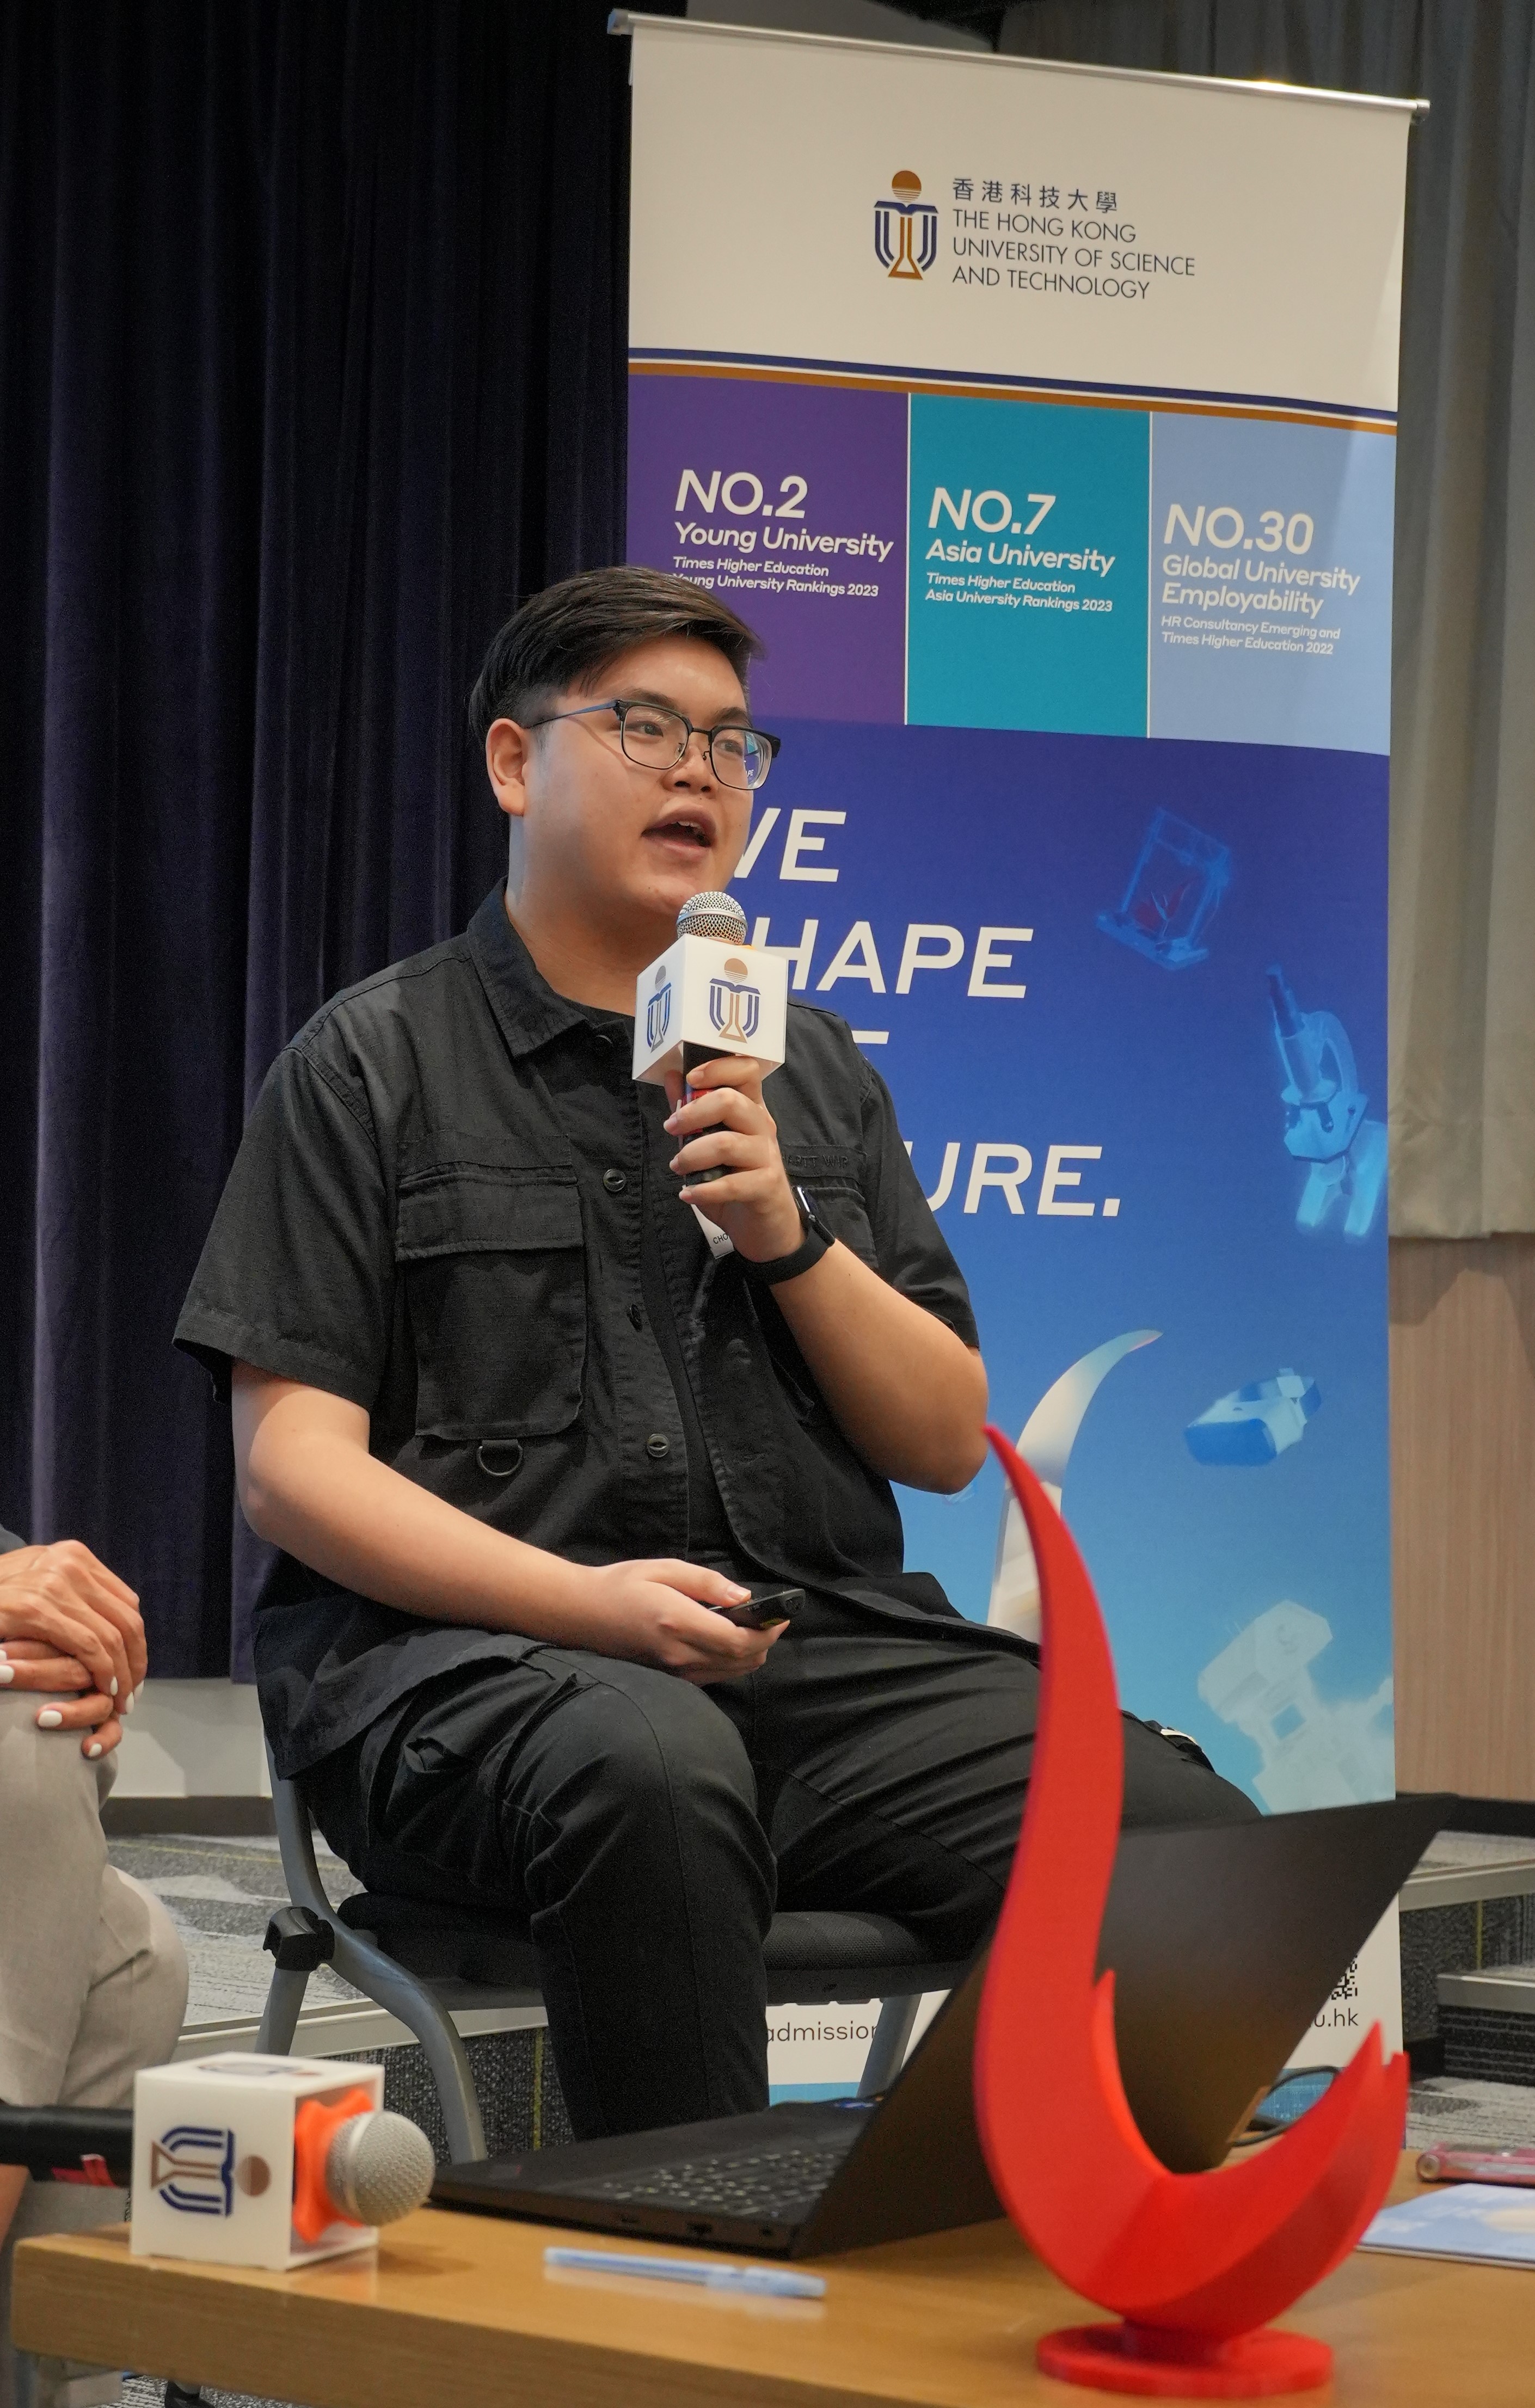 Adrian CHONG Ngai-Chun, a Year 1 student at HKUST School of Engineering, who obtained five subjects of 5**, one subject of 5*, and one subject of 5 in HKDSE, believes that artificial intelligence (AI) is the trend of the future. At HKUST, he hopes to acquire professional knowledge in computer science and engineering as well as learn the theory and practical applications of AI and robotics design.